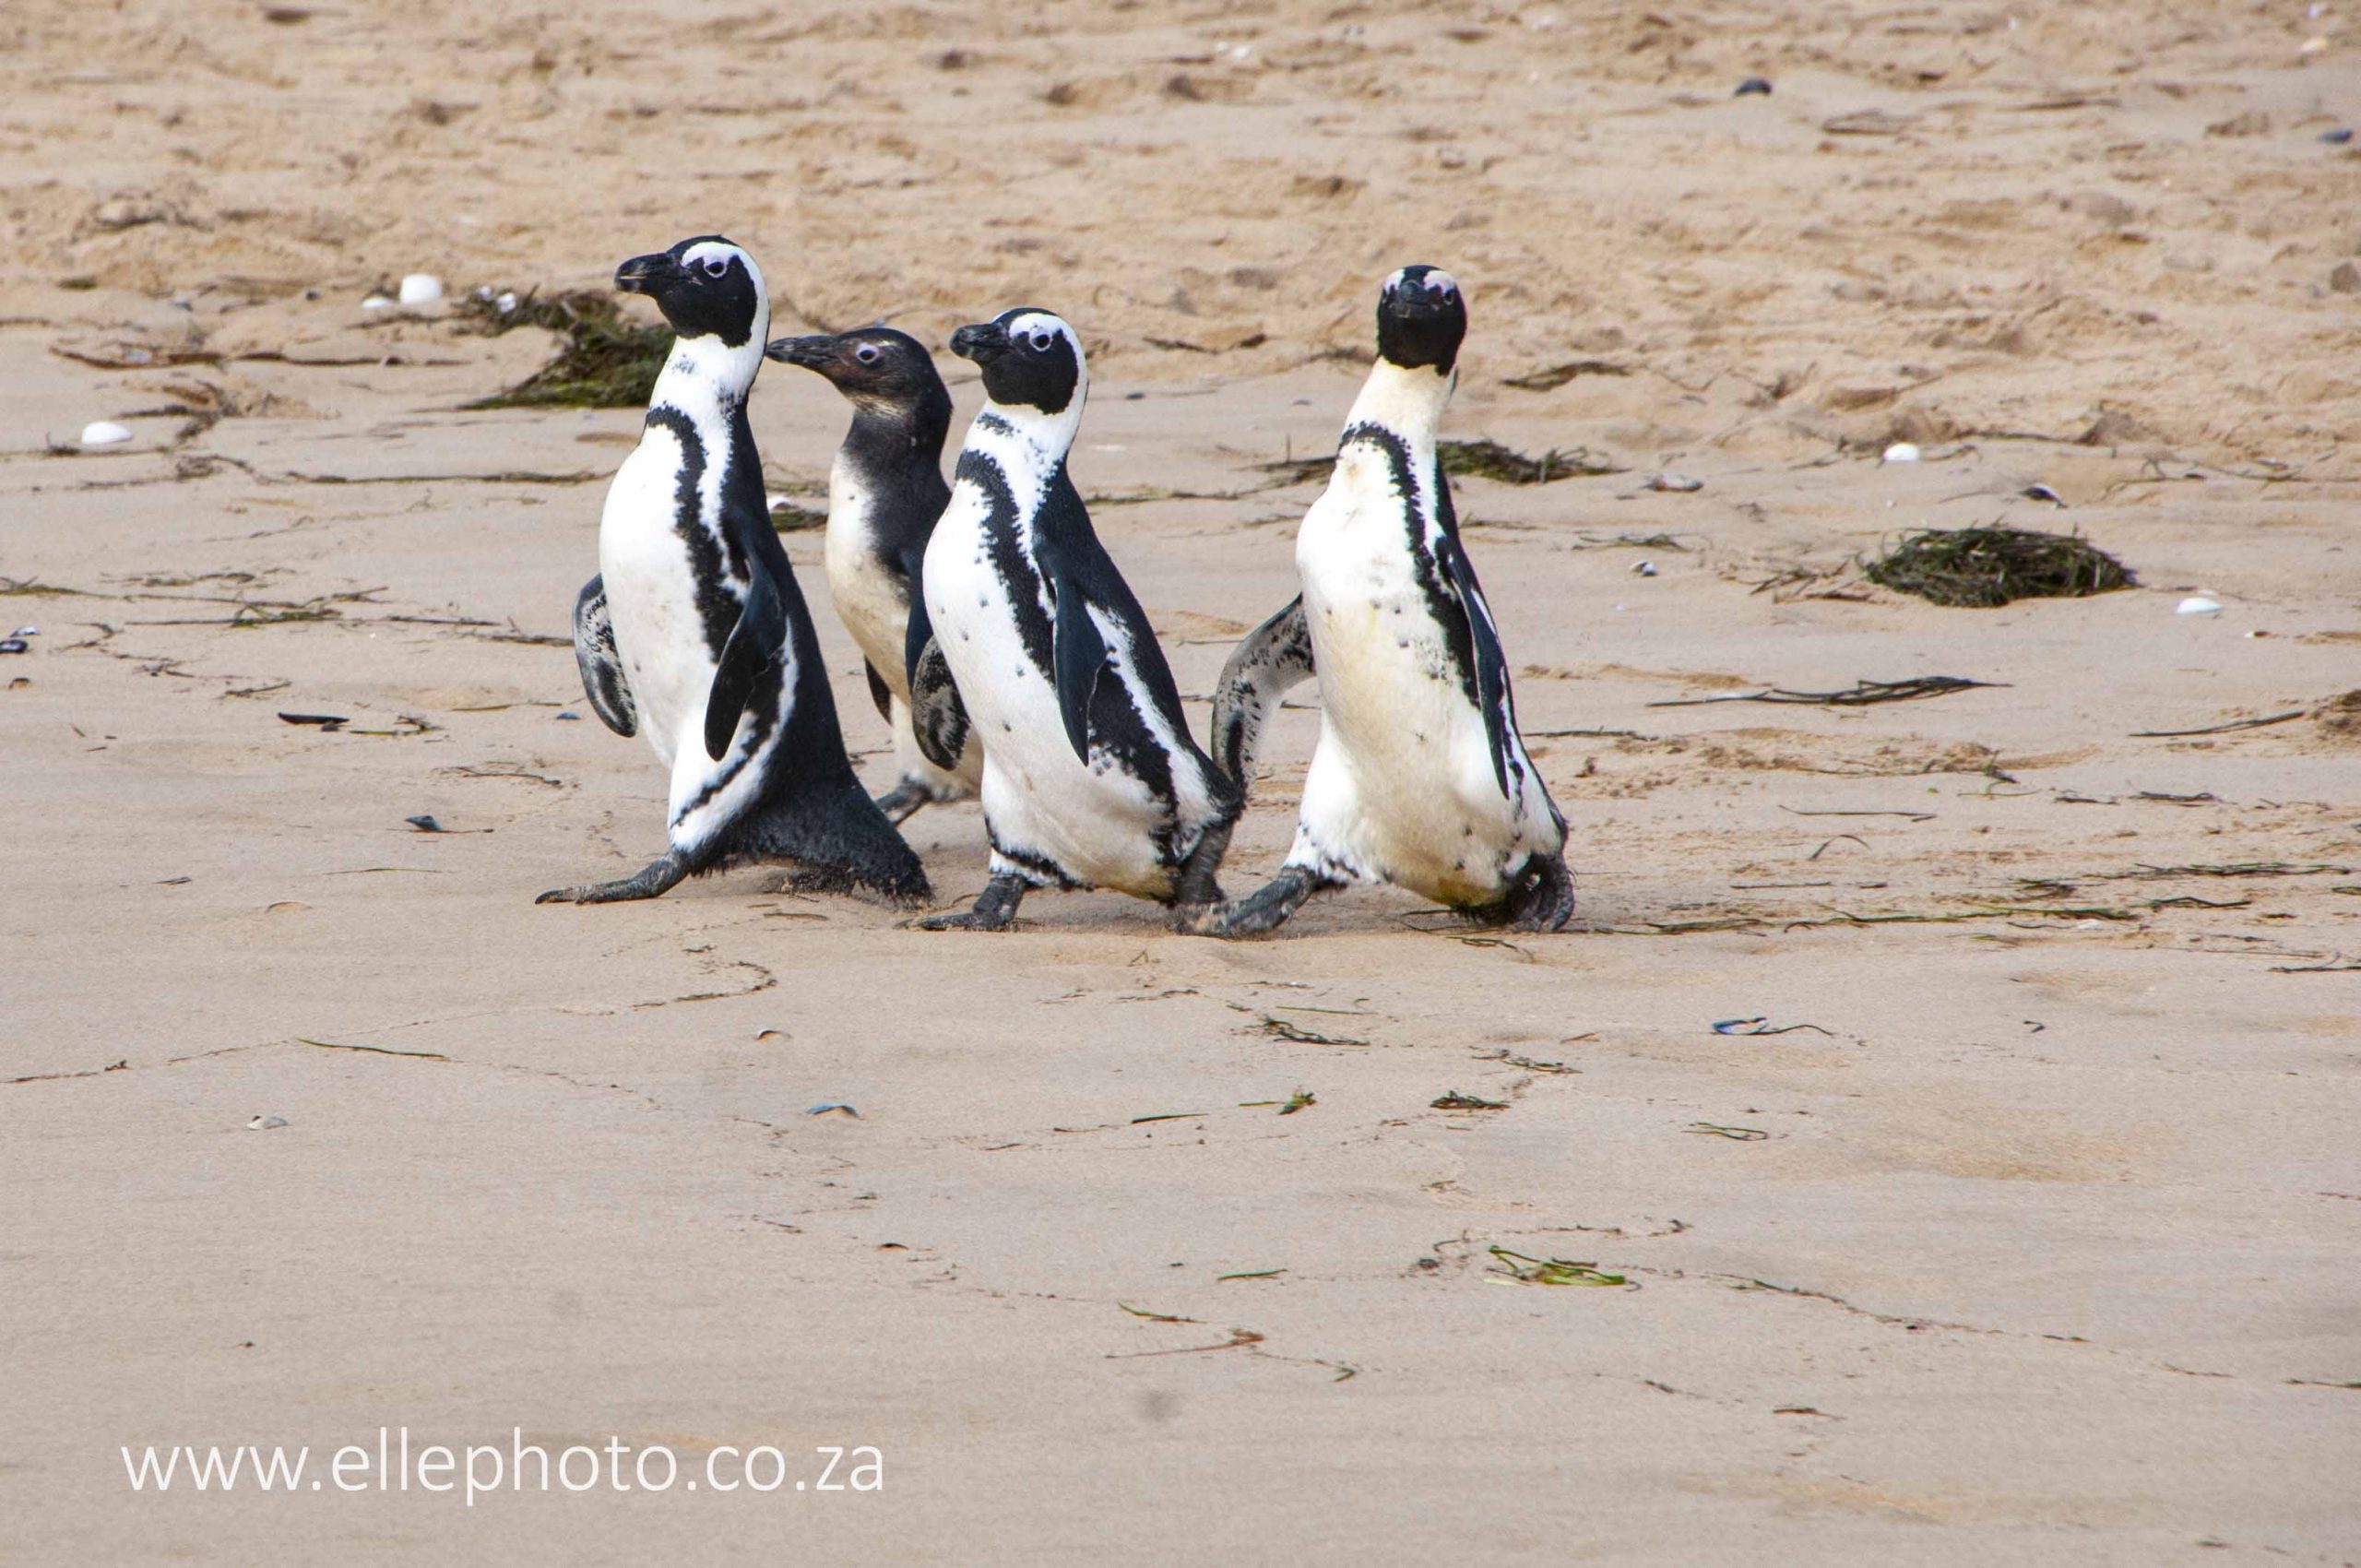 Penguins released on Lookout Beach on Saturday 20 Mar 2021